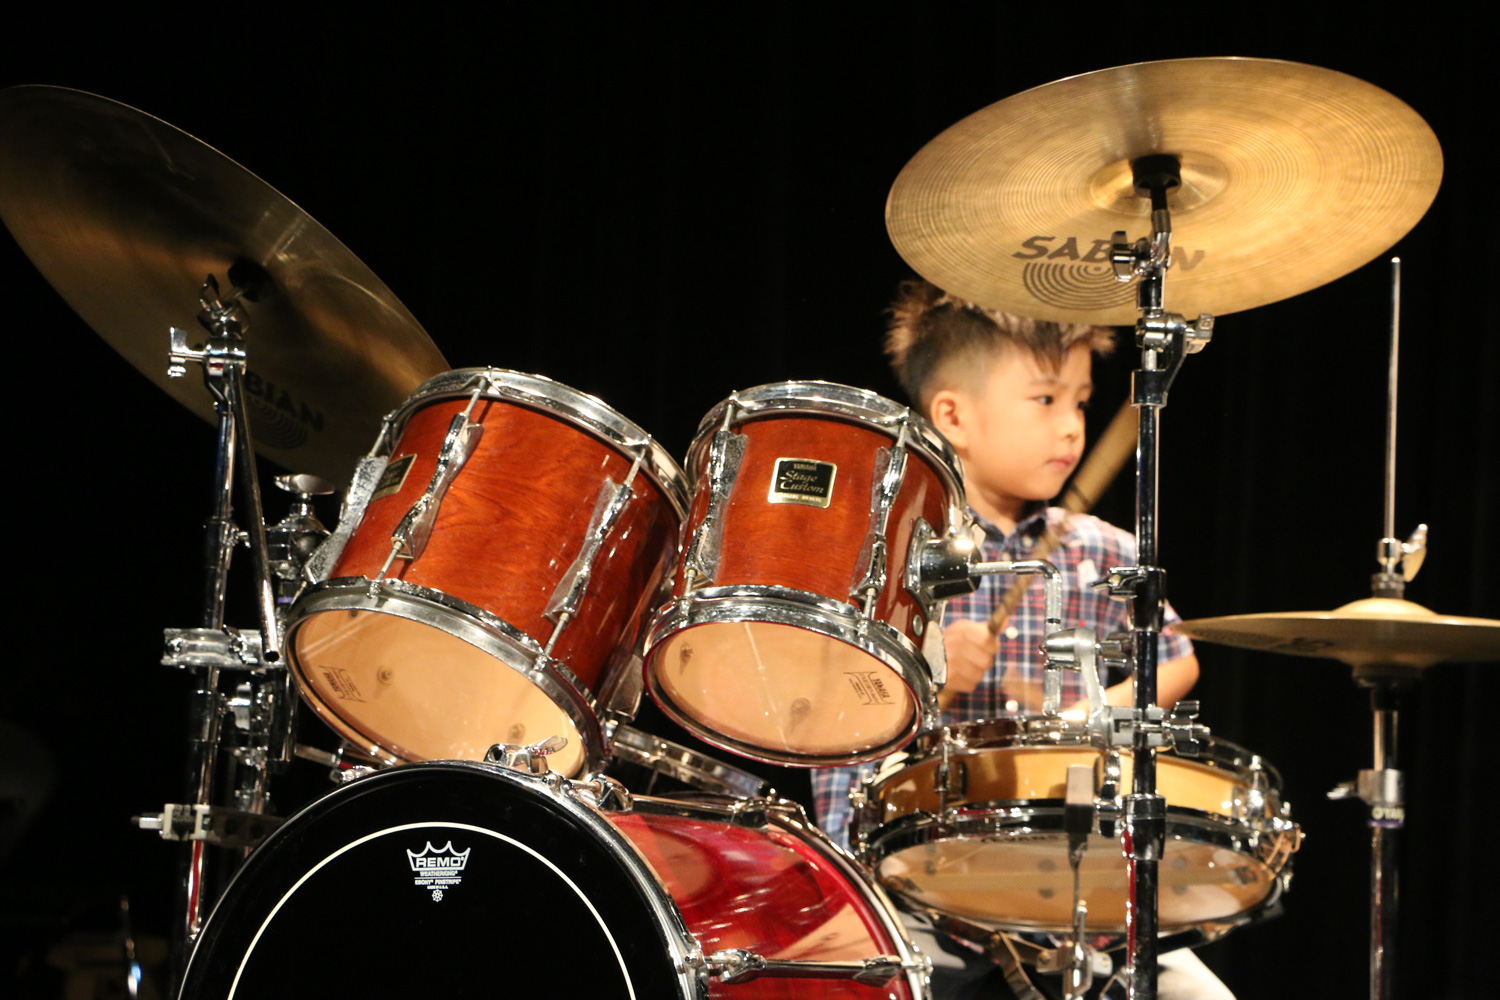 Drum for young children